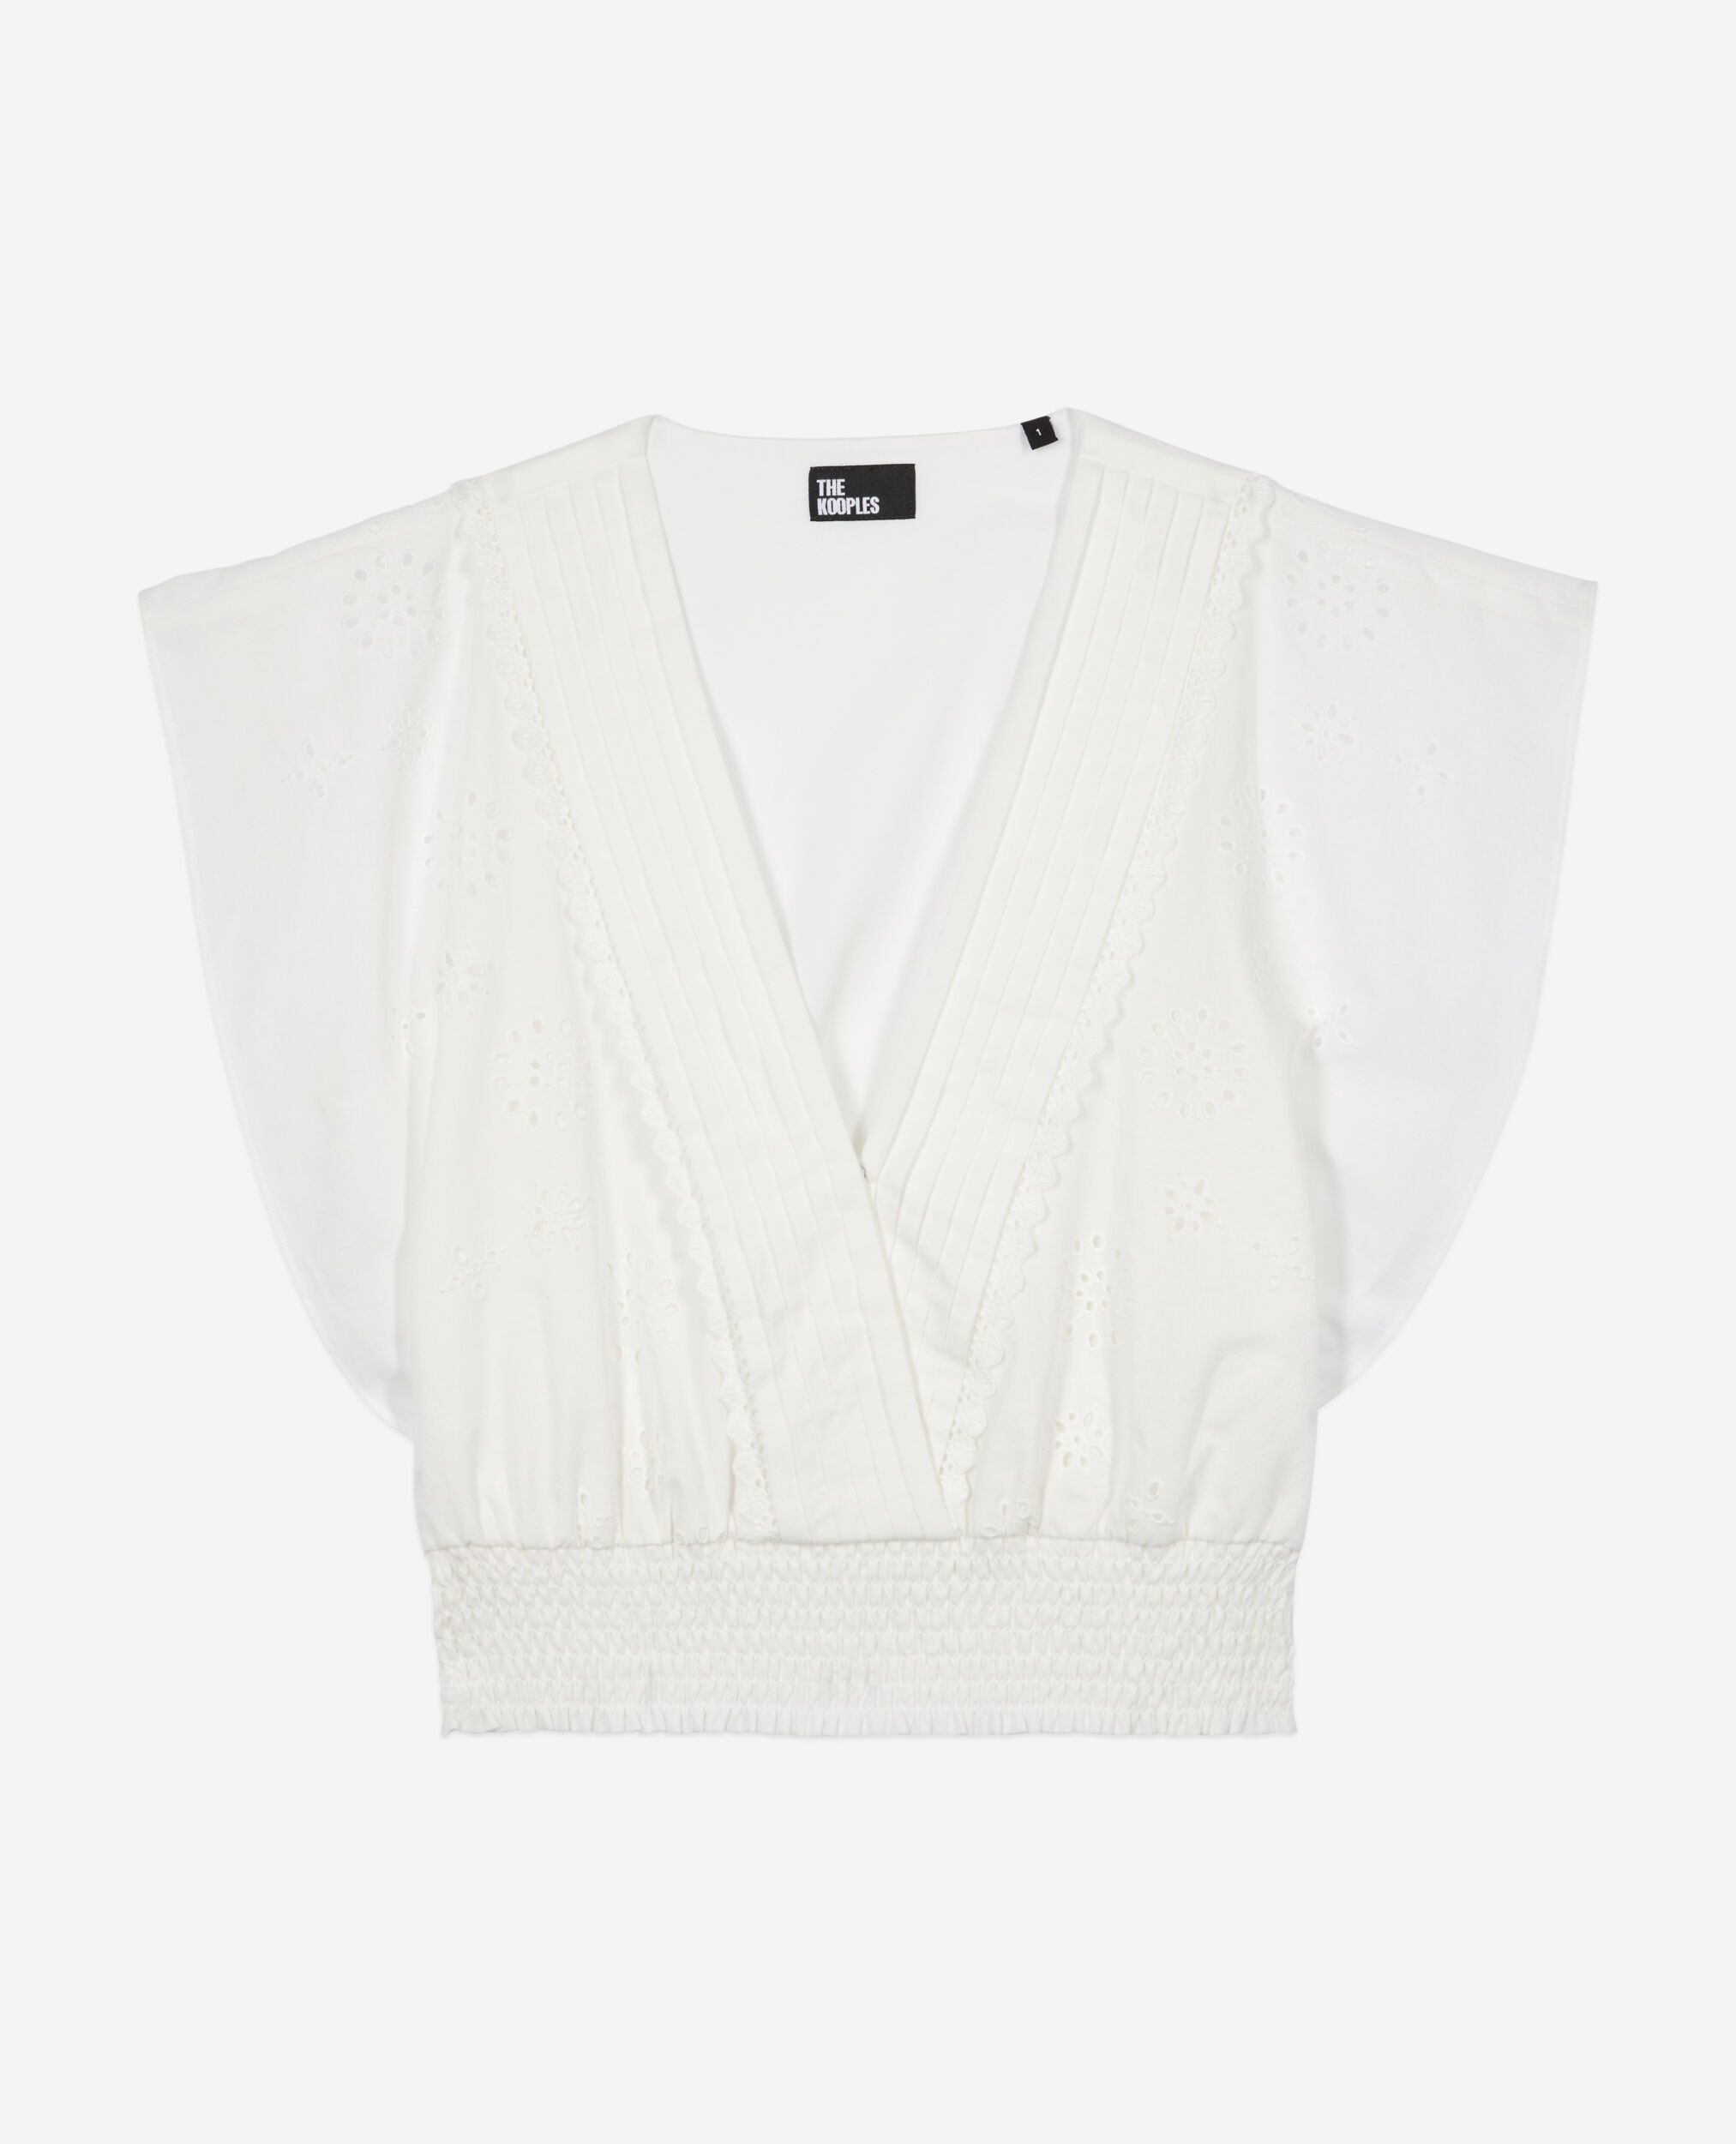 Top court blanc en broderie anglaise, WHITE, hi-res image number null